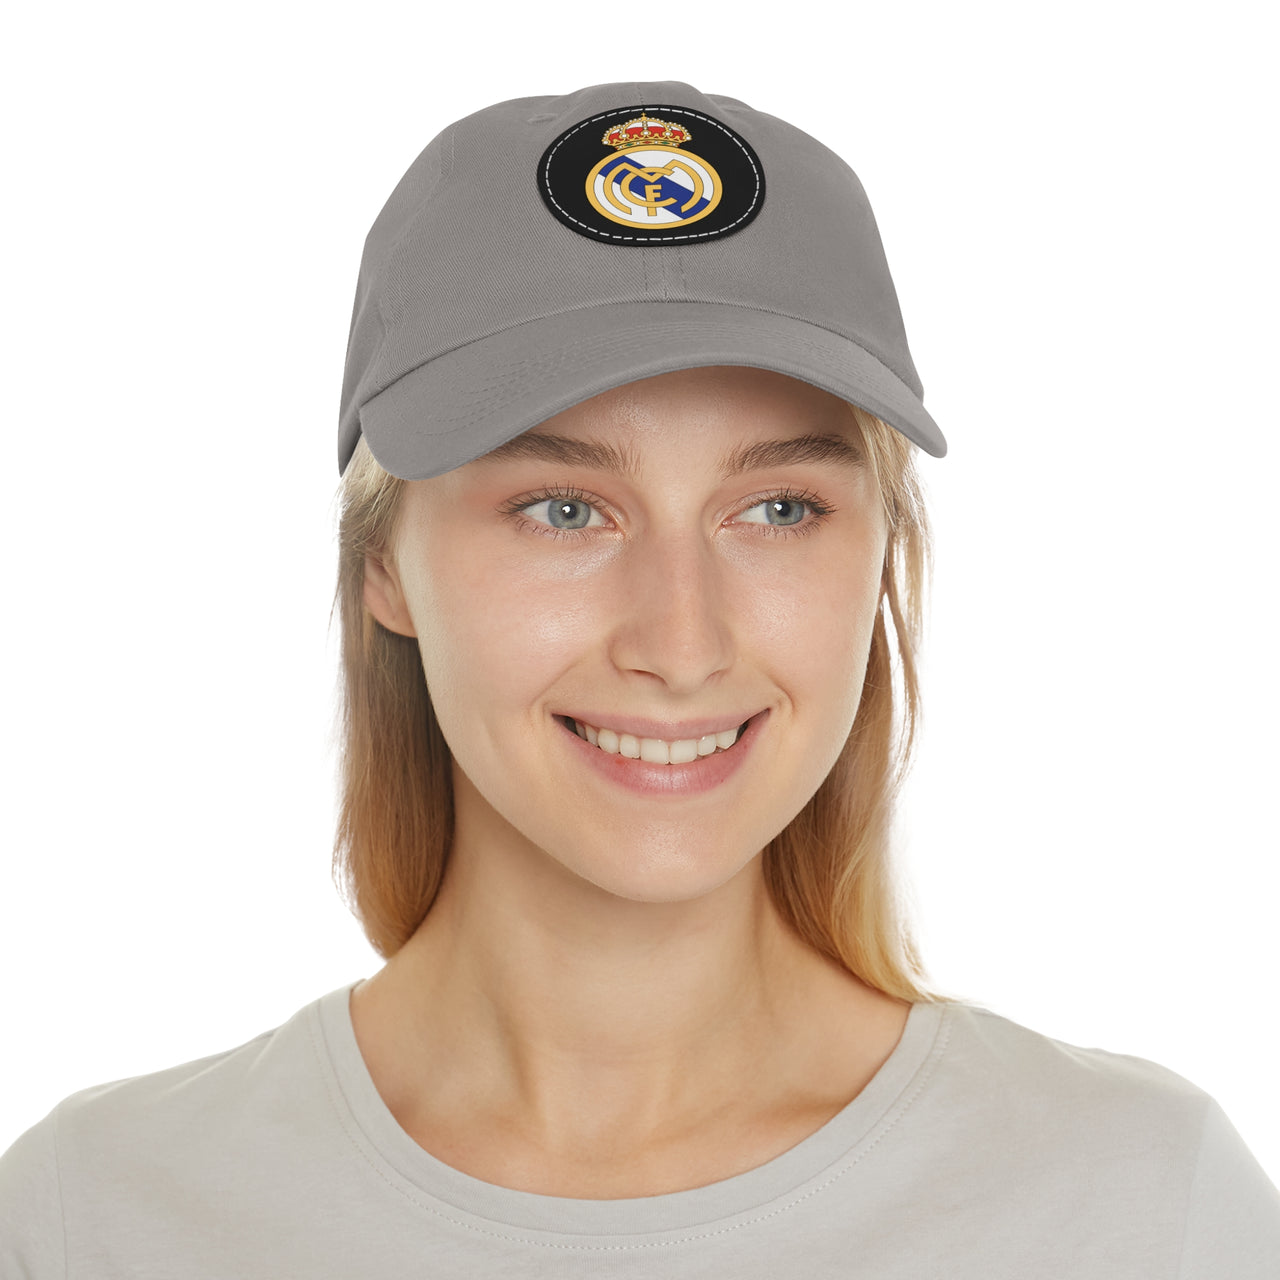 Real Madrid Dad Hat with Leather Patch (Round)